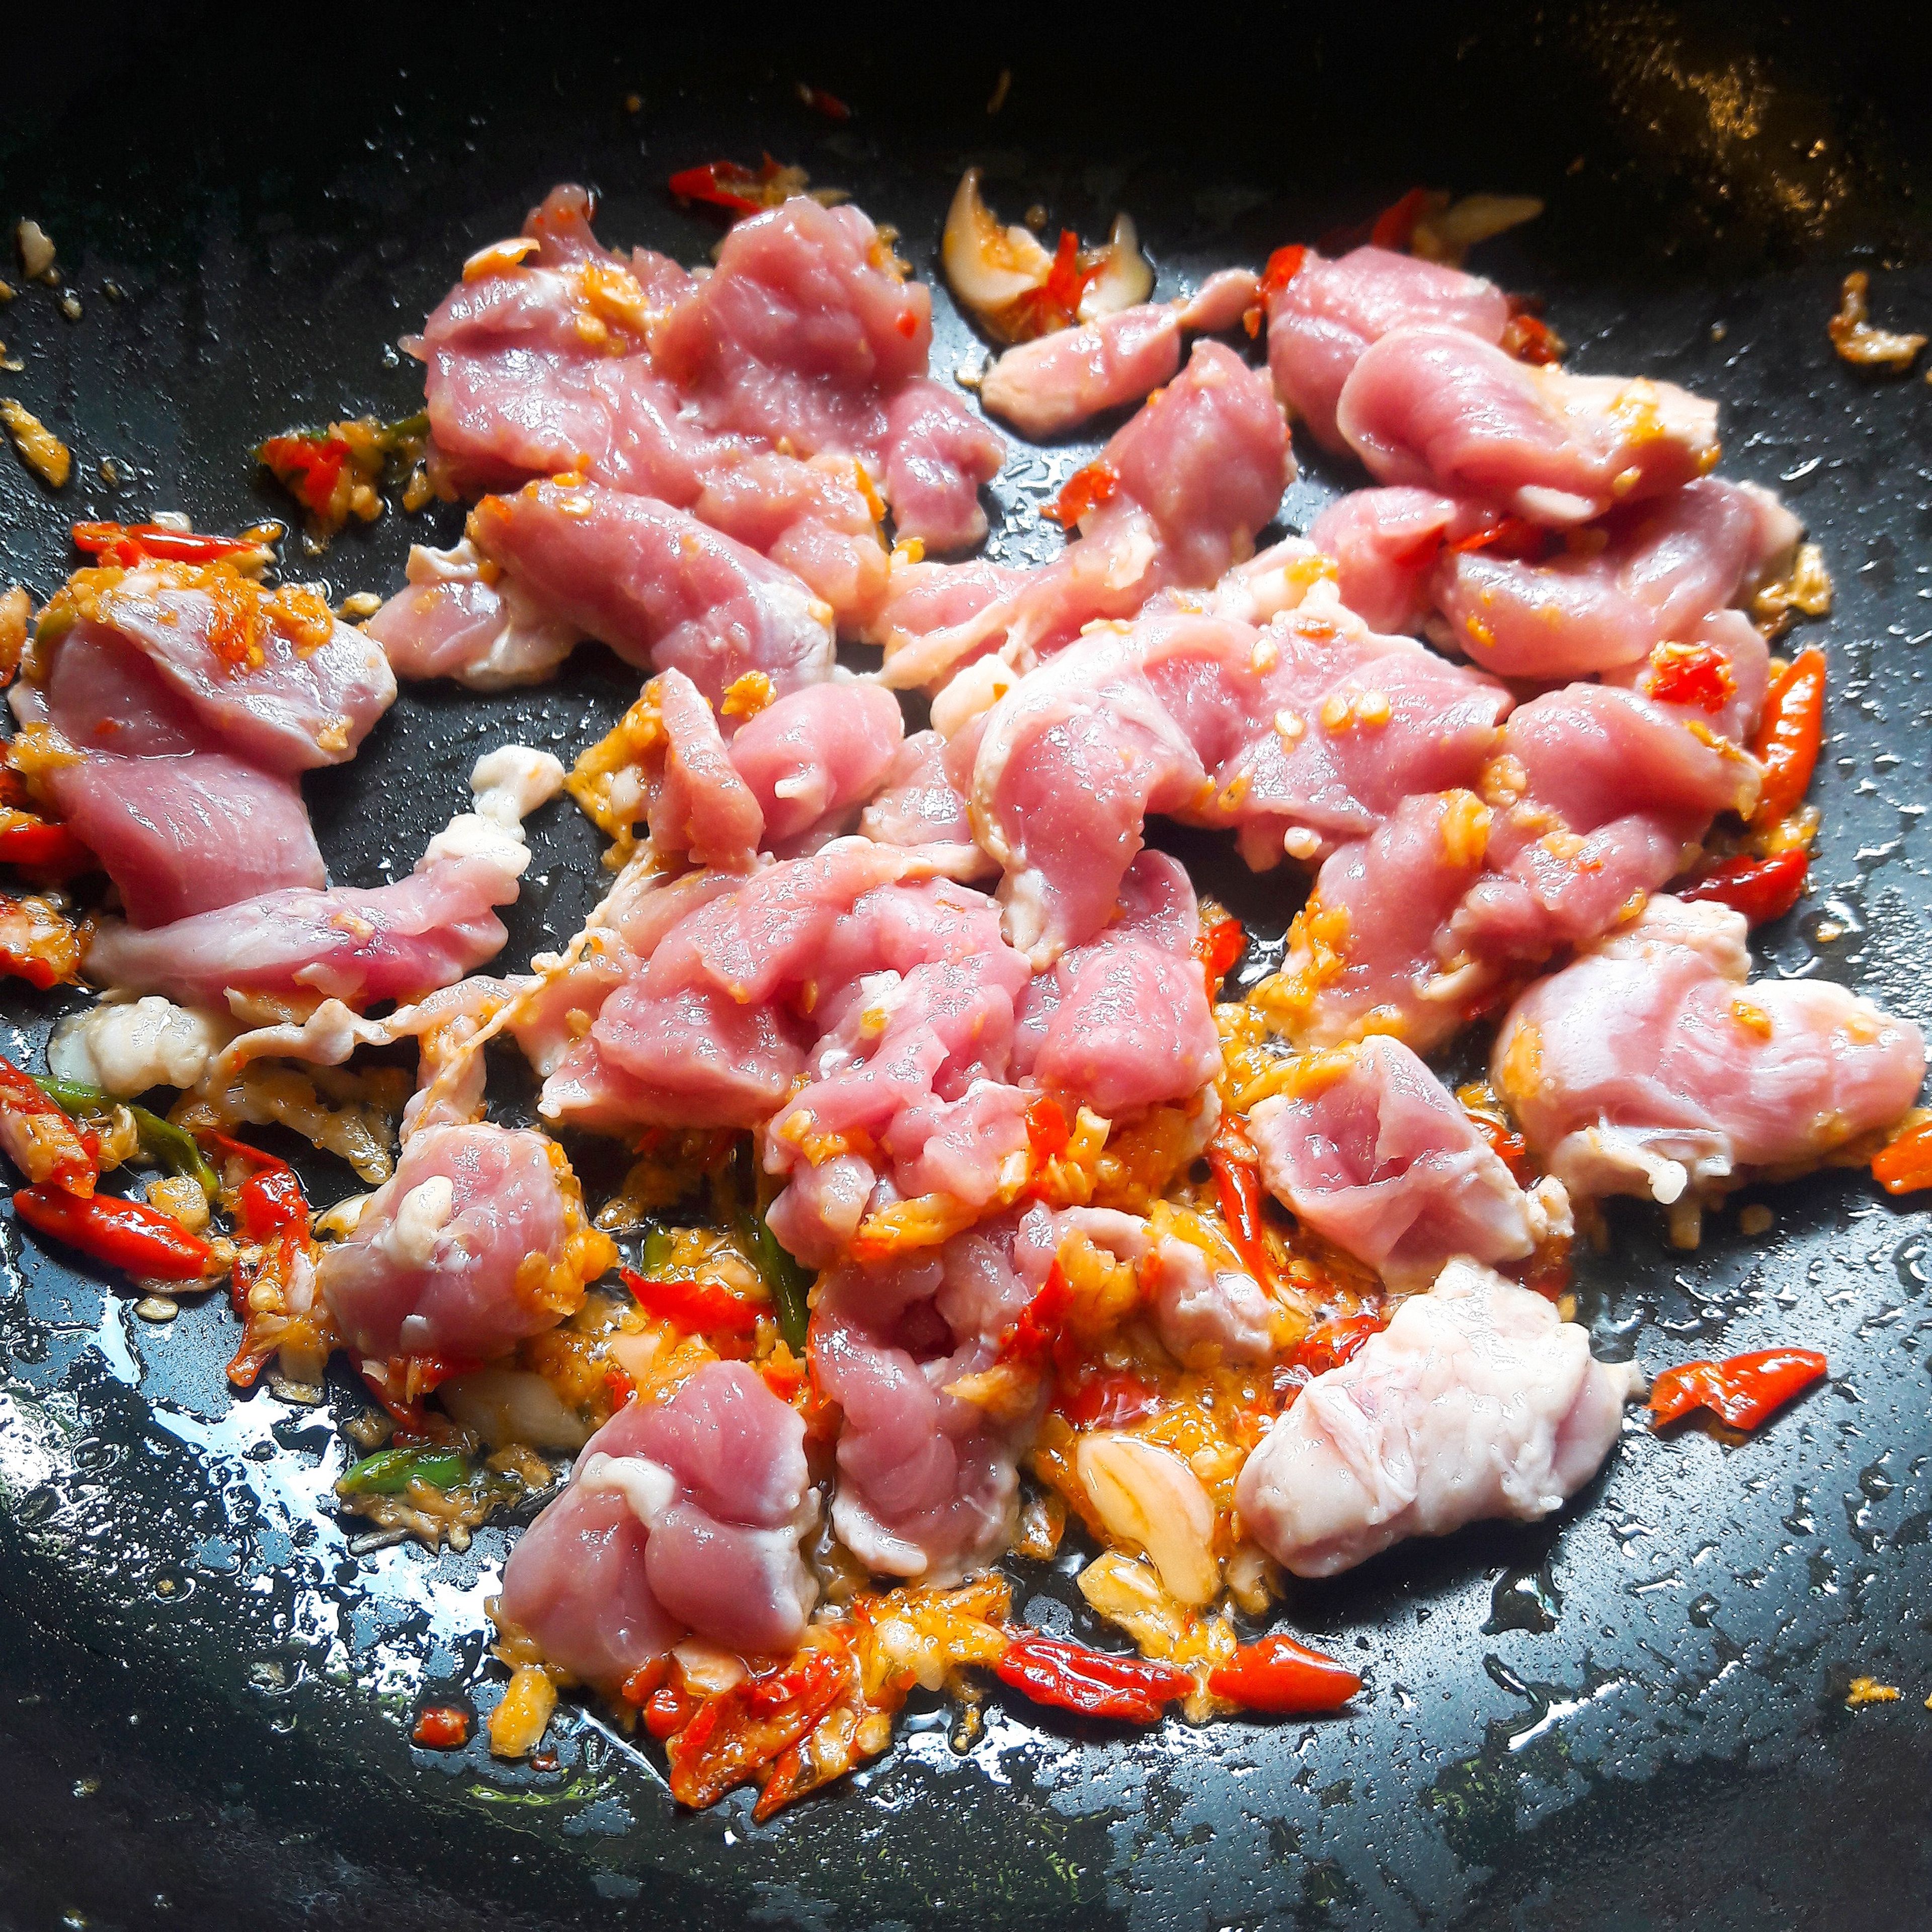 Heat the vegetable oil in a frying pan or a wok over high heat. Add the garlic and chili paste and cook for another 30 seconds. Then add the sliced pork and stir-fry 3-4minutes or until the pork is cooked. Add oyster sauce, fish sauce and sugar and stir-fry until well combined.